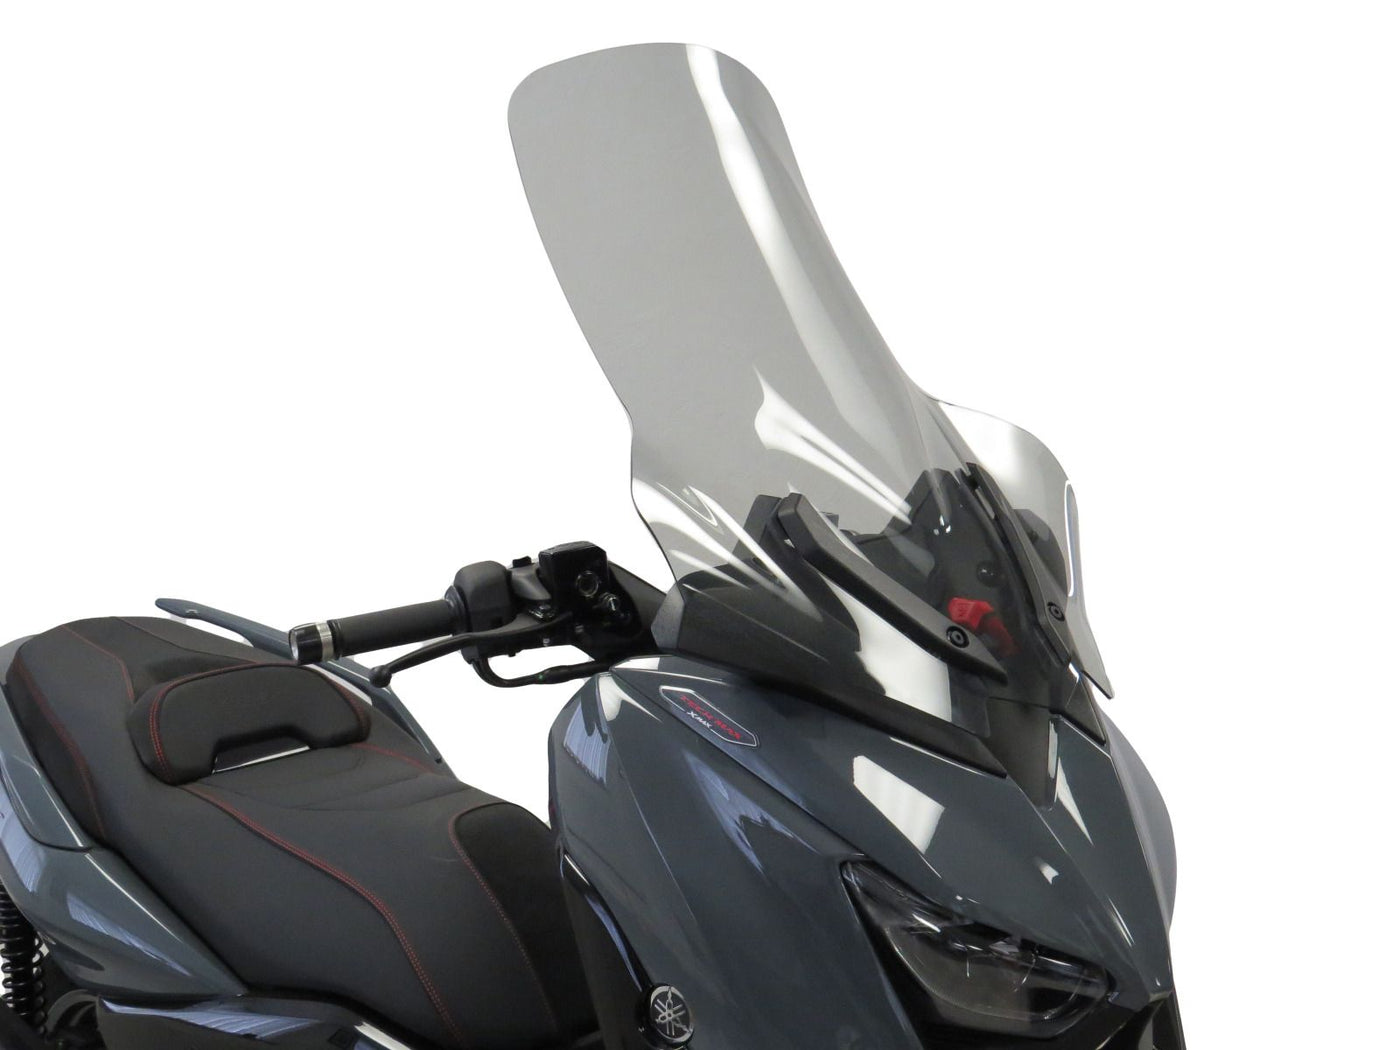 Touring Screen (720mm High) for YAMAHA X-Max 125, 300, 400 & Tricity 300